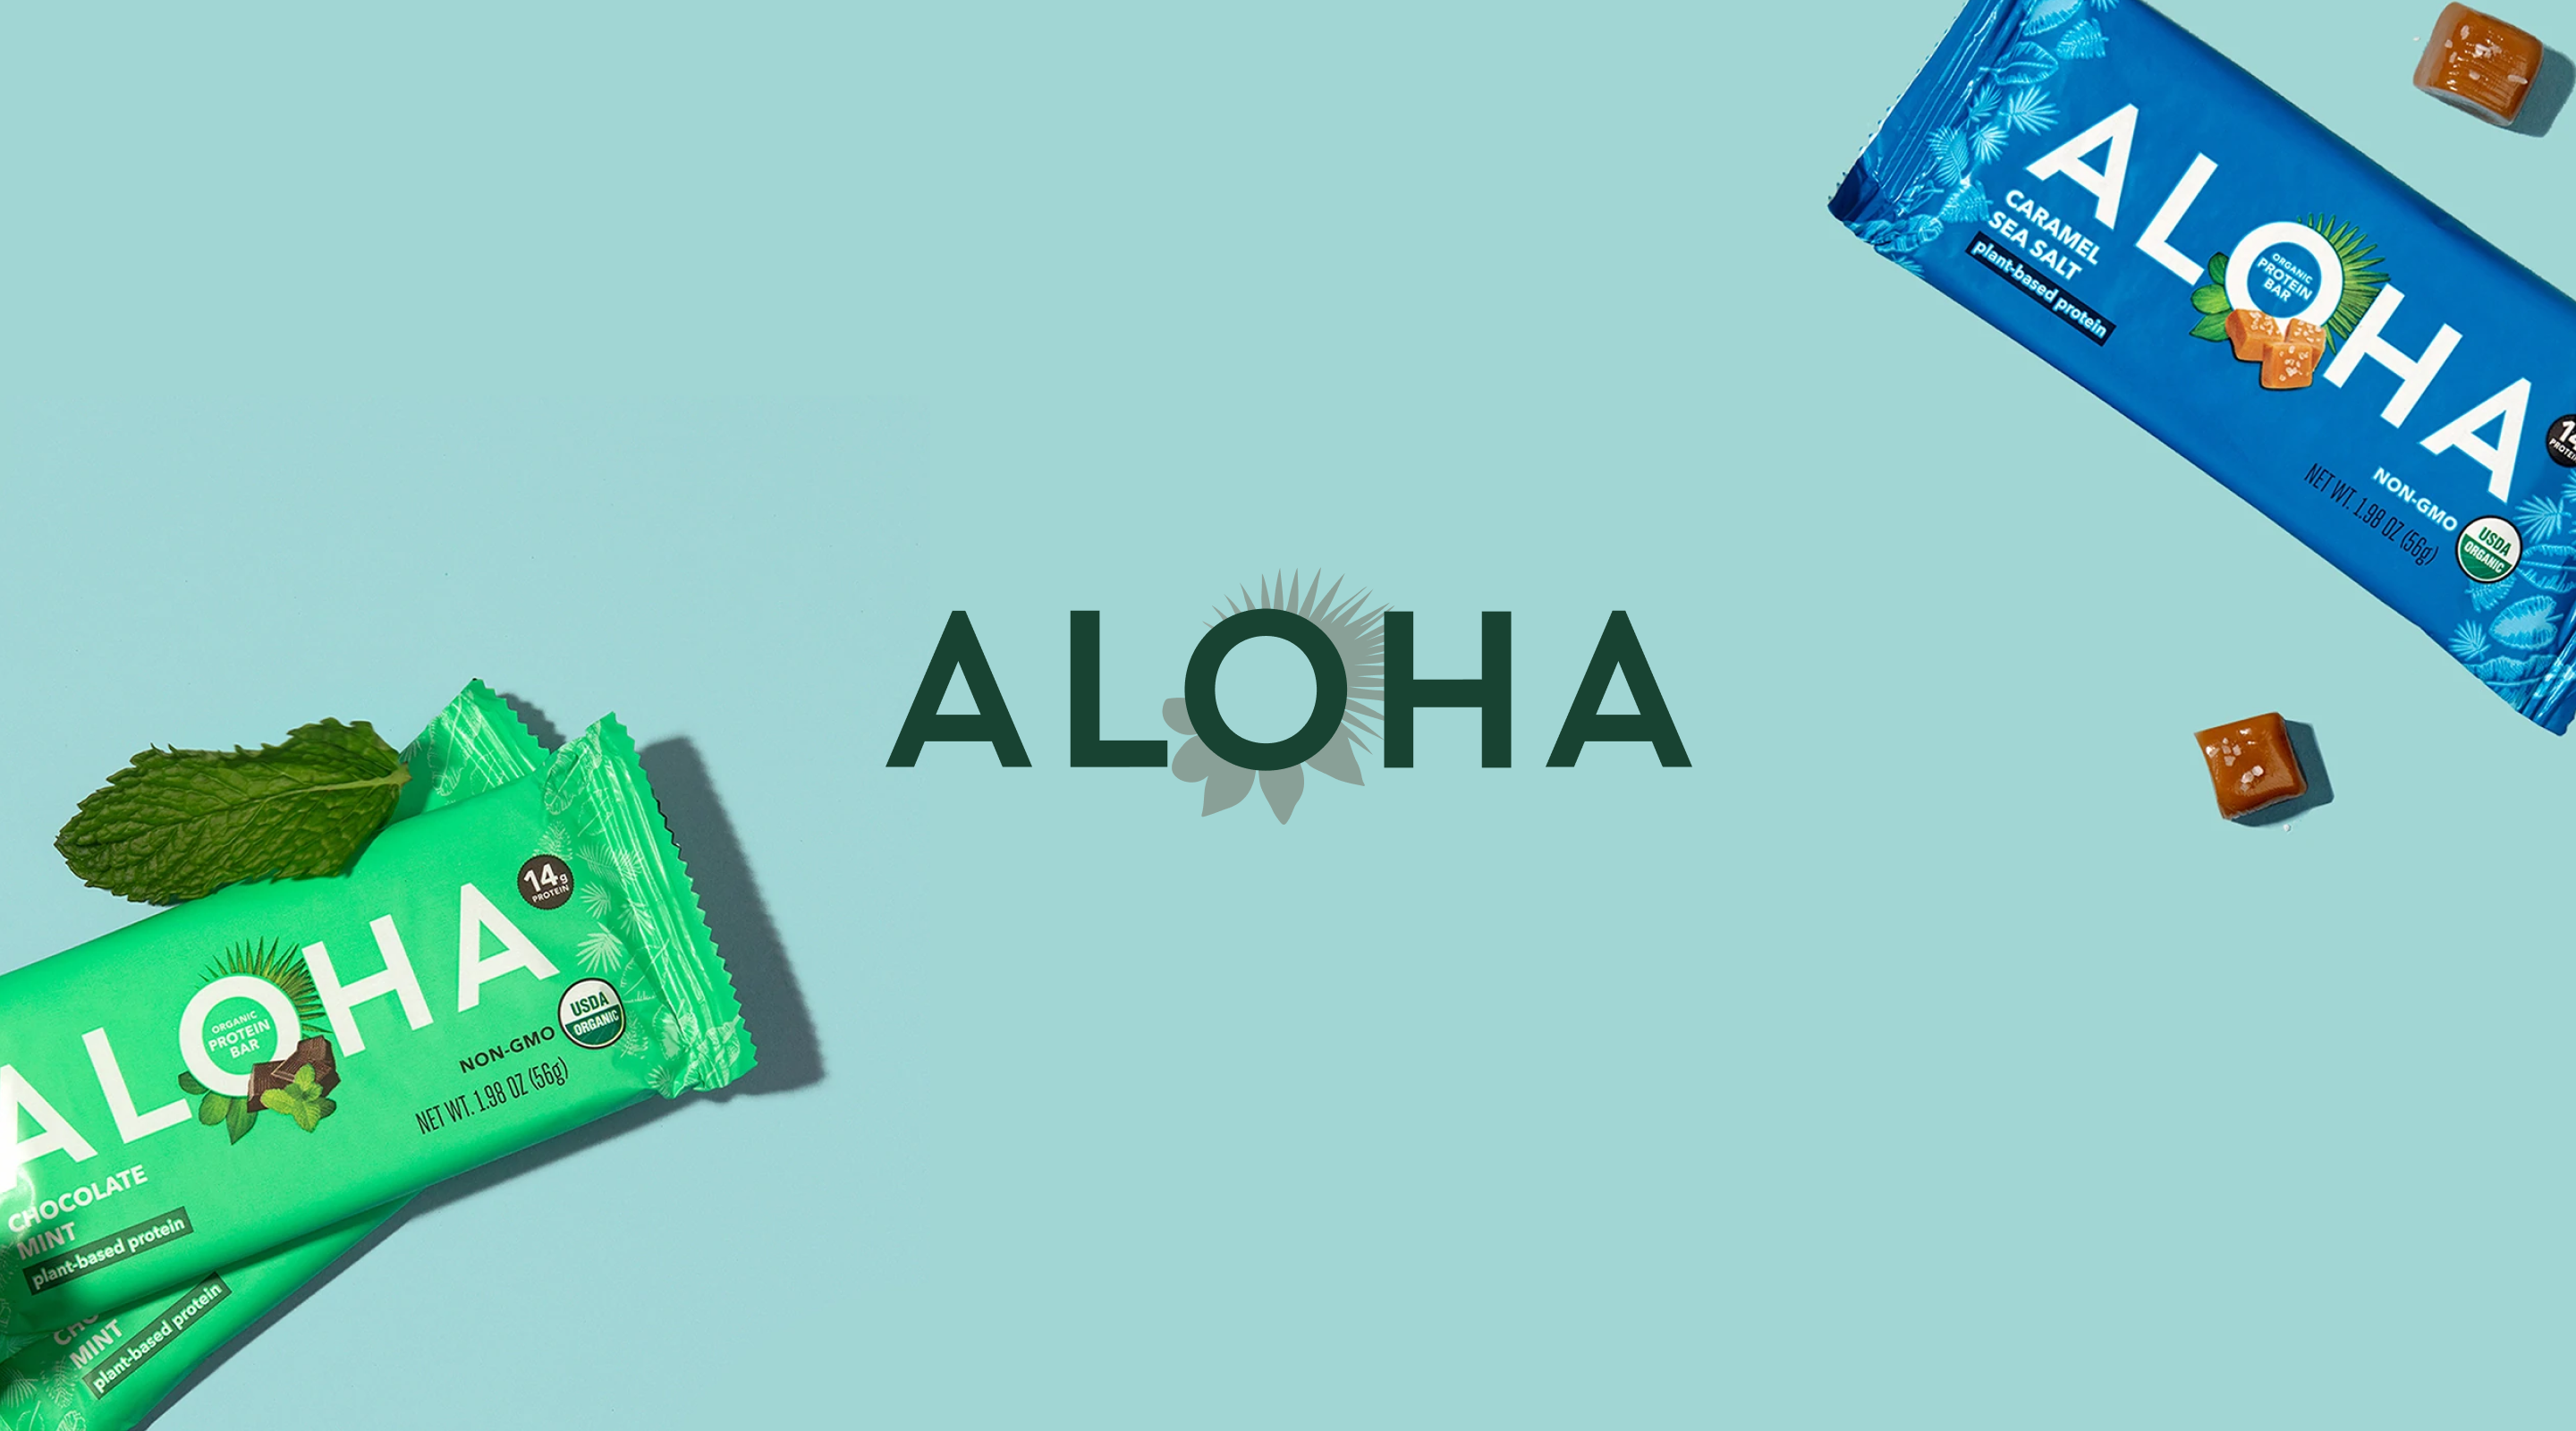 How Aloha Uses Bundles to Increase Customer Lifetime Value as a CPG brand